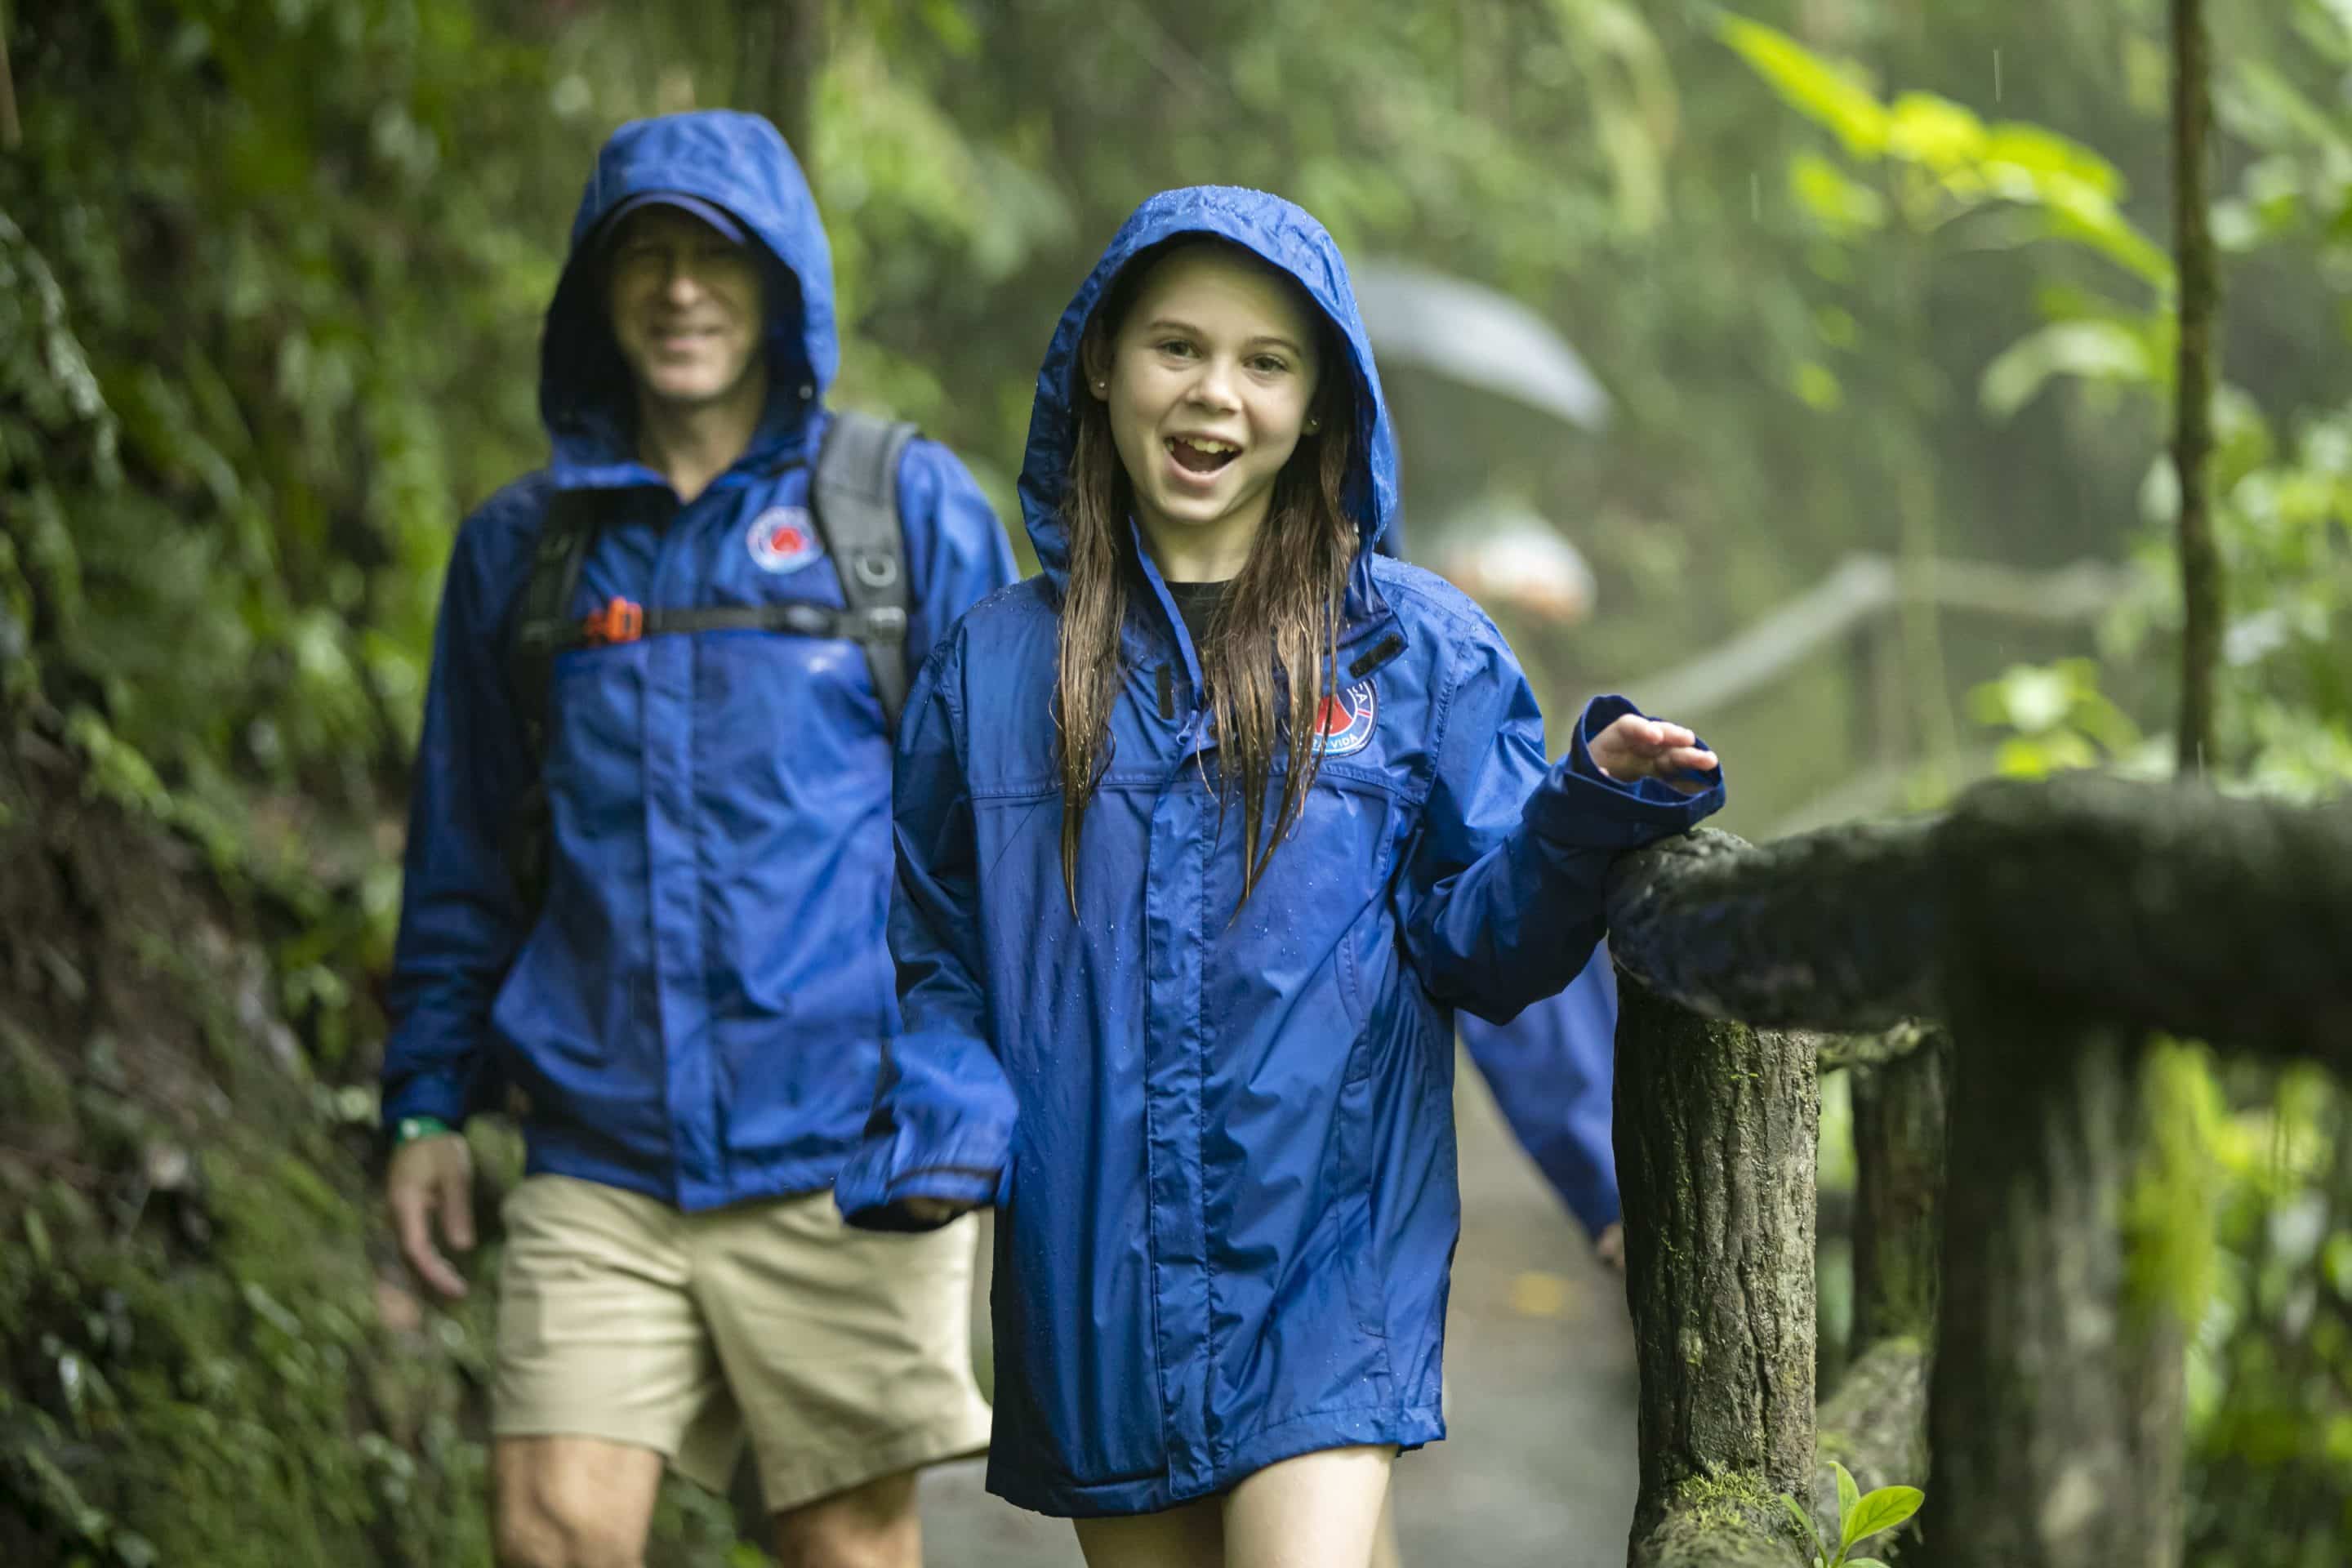 Are you planning to visit Costa Rica in August? Be prepared for what the weather could bring!